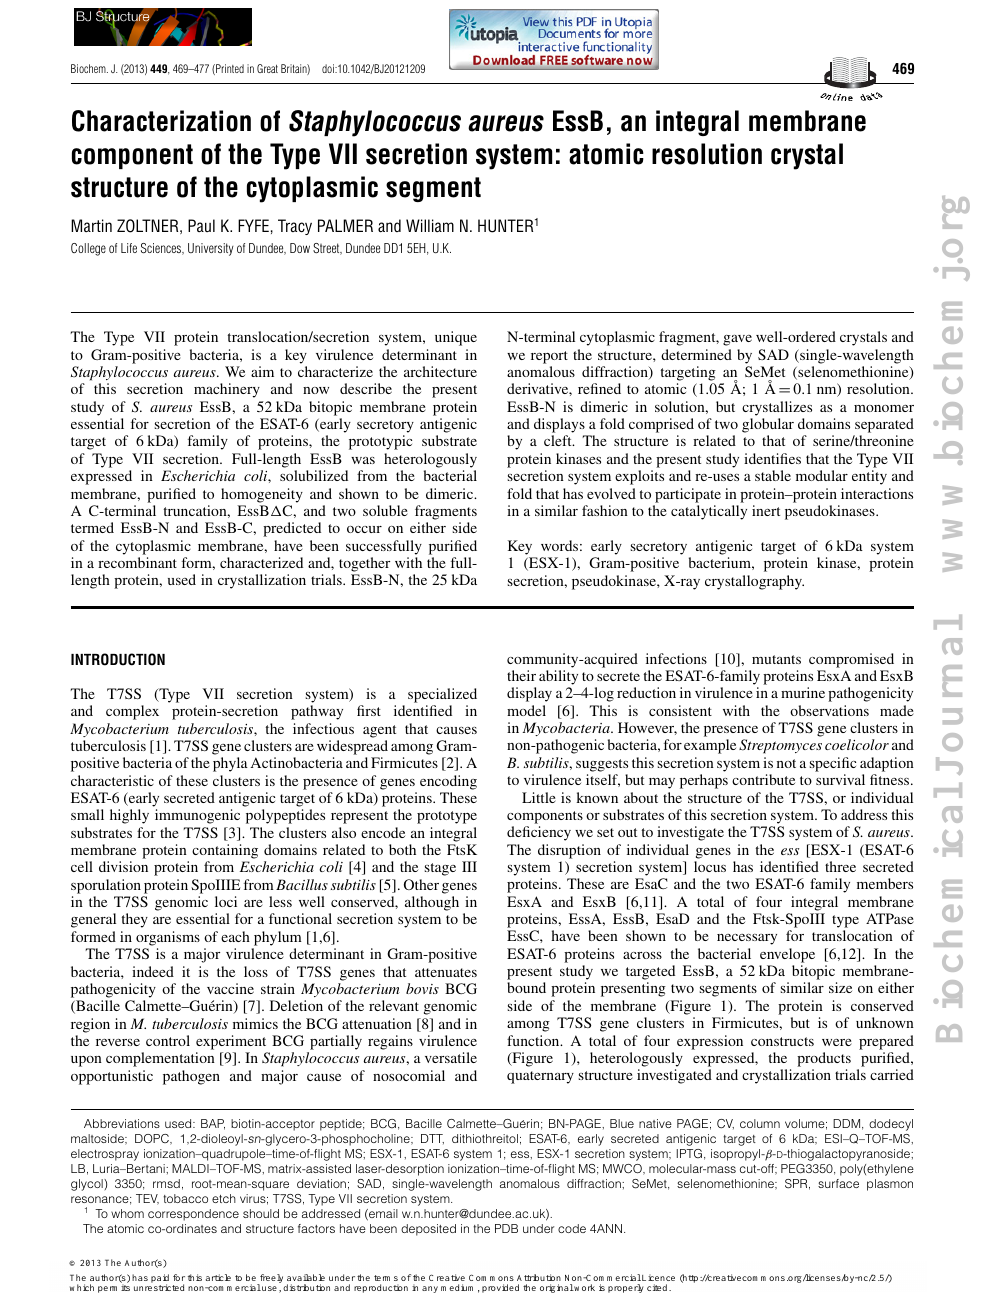 Characterization Of Staphylococcus Aureus Essb An Integral Membrane Component Of The Type Vii Secretion System Atomic Resolution Crystal Structure Of The Cytoplasmic Segment Topic Of Research Paper In Biological Sciences Download